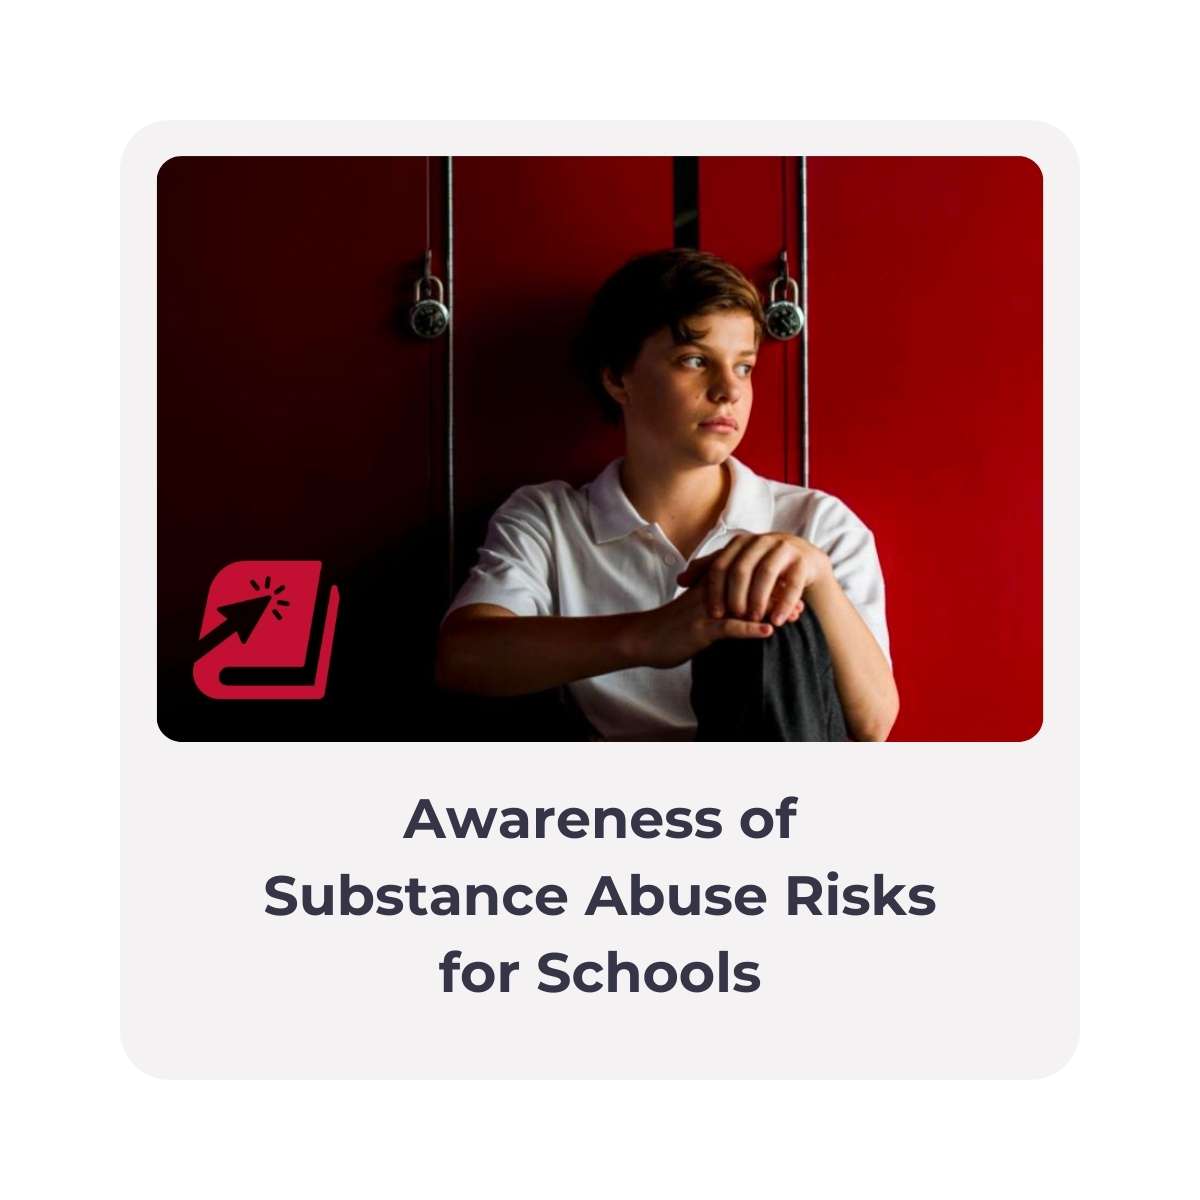 Awareness of Substance Abuse Risks for Schools